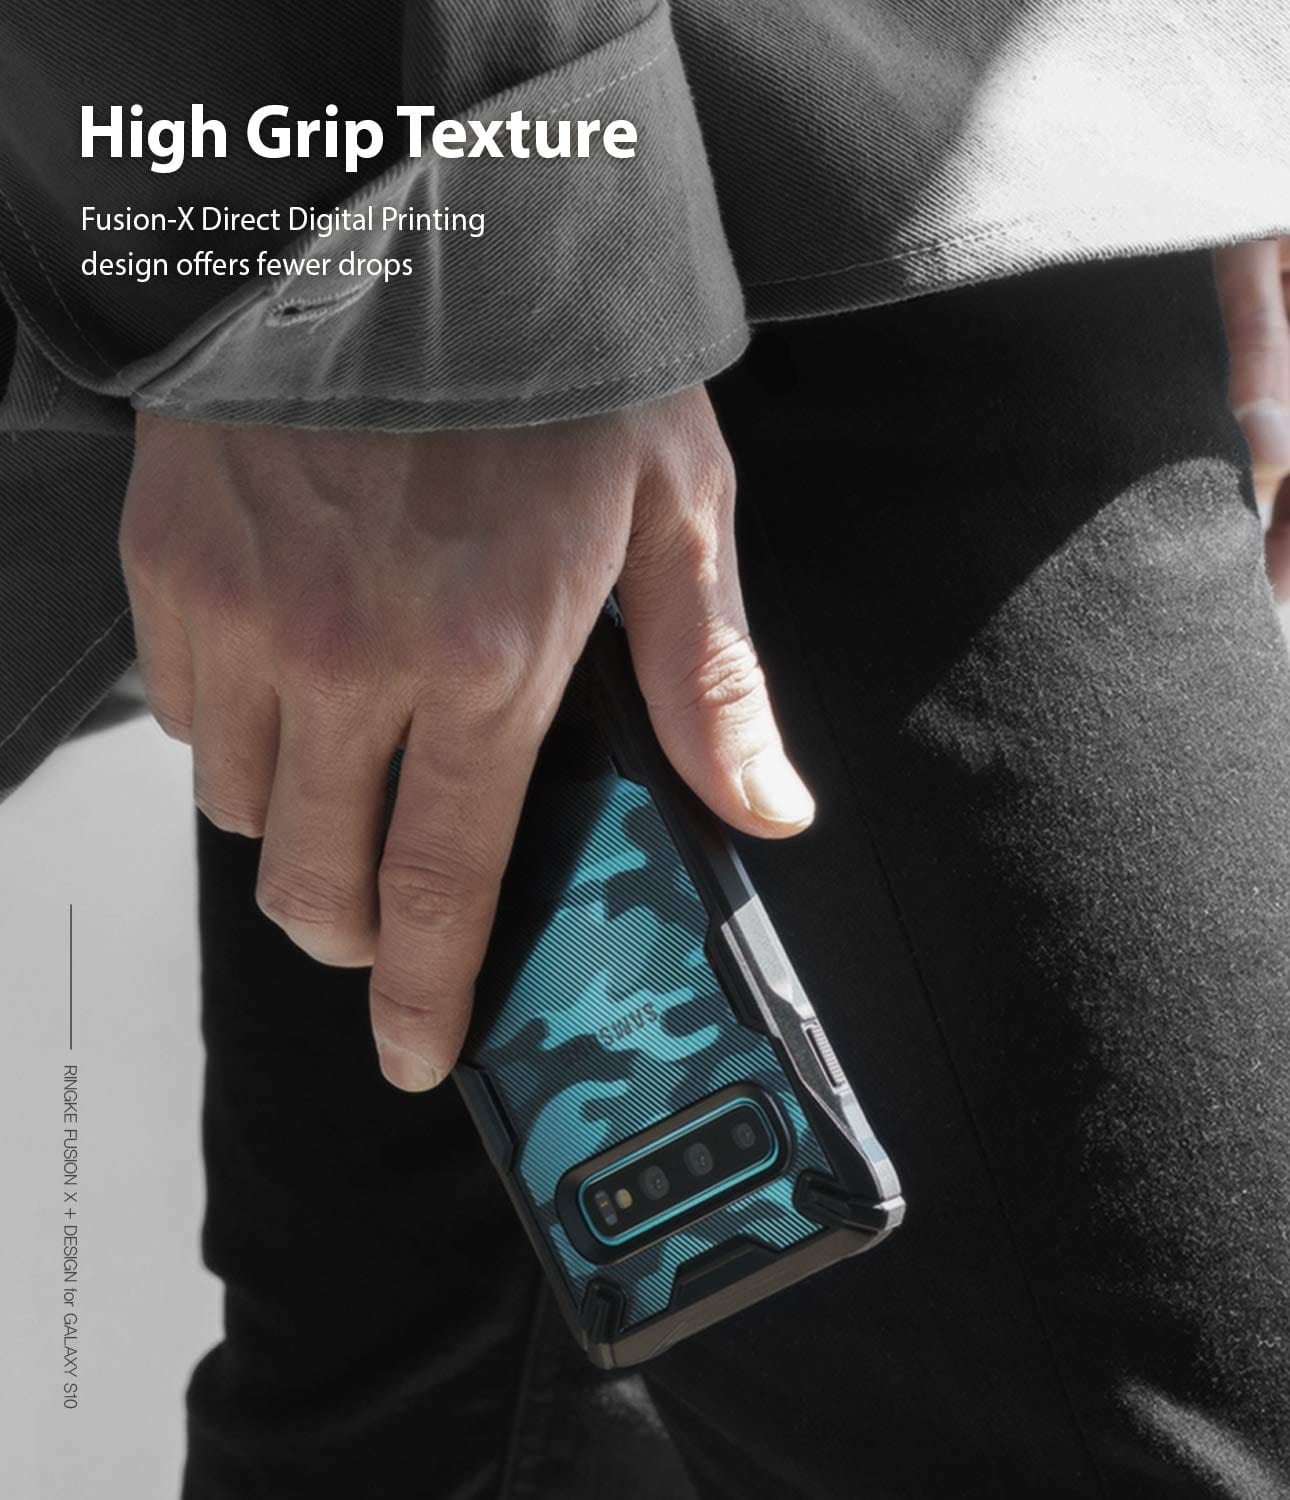 Ringke FusionX features a high-grip texture for enhanced handling